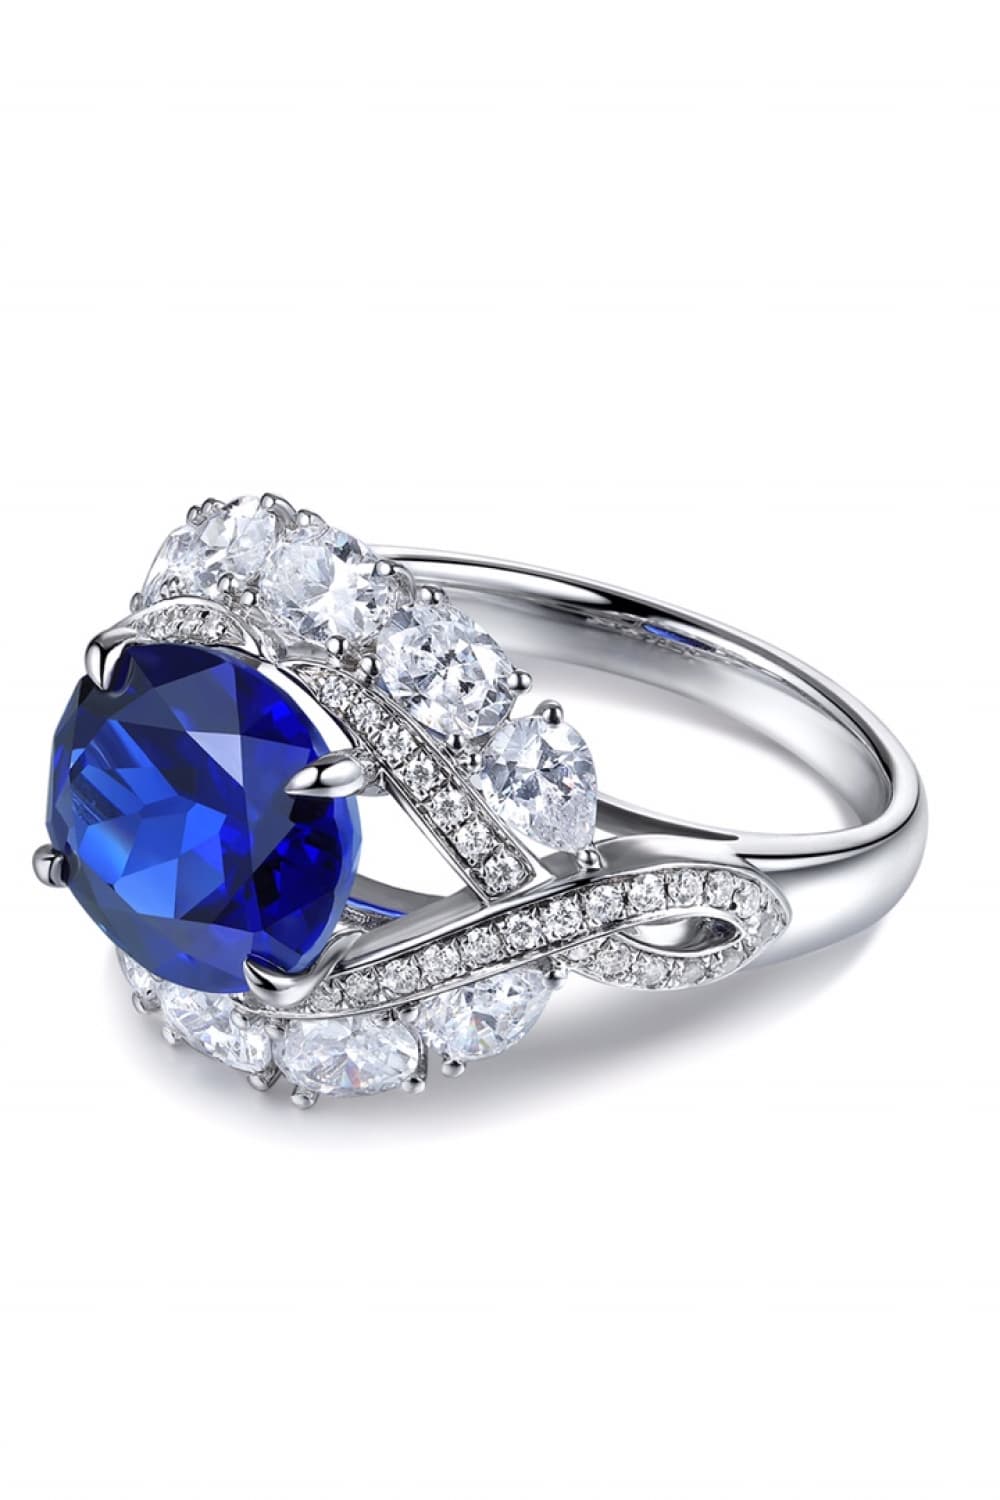 5 Carat Lab-Grown Sapphire Platinum-Plated Ring BLUE ZONE PLANET